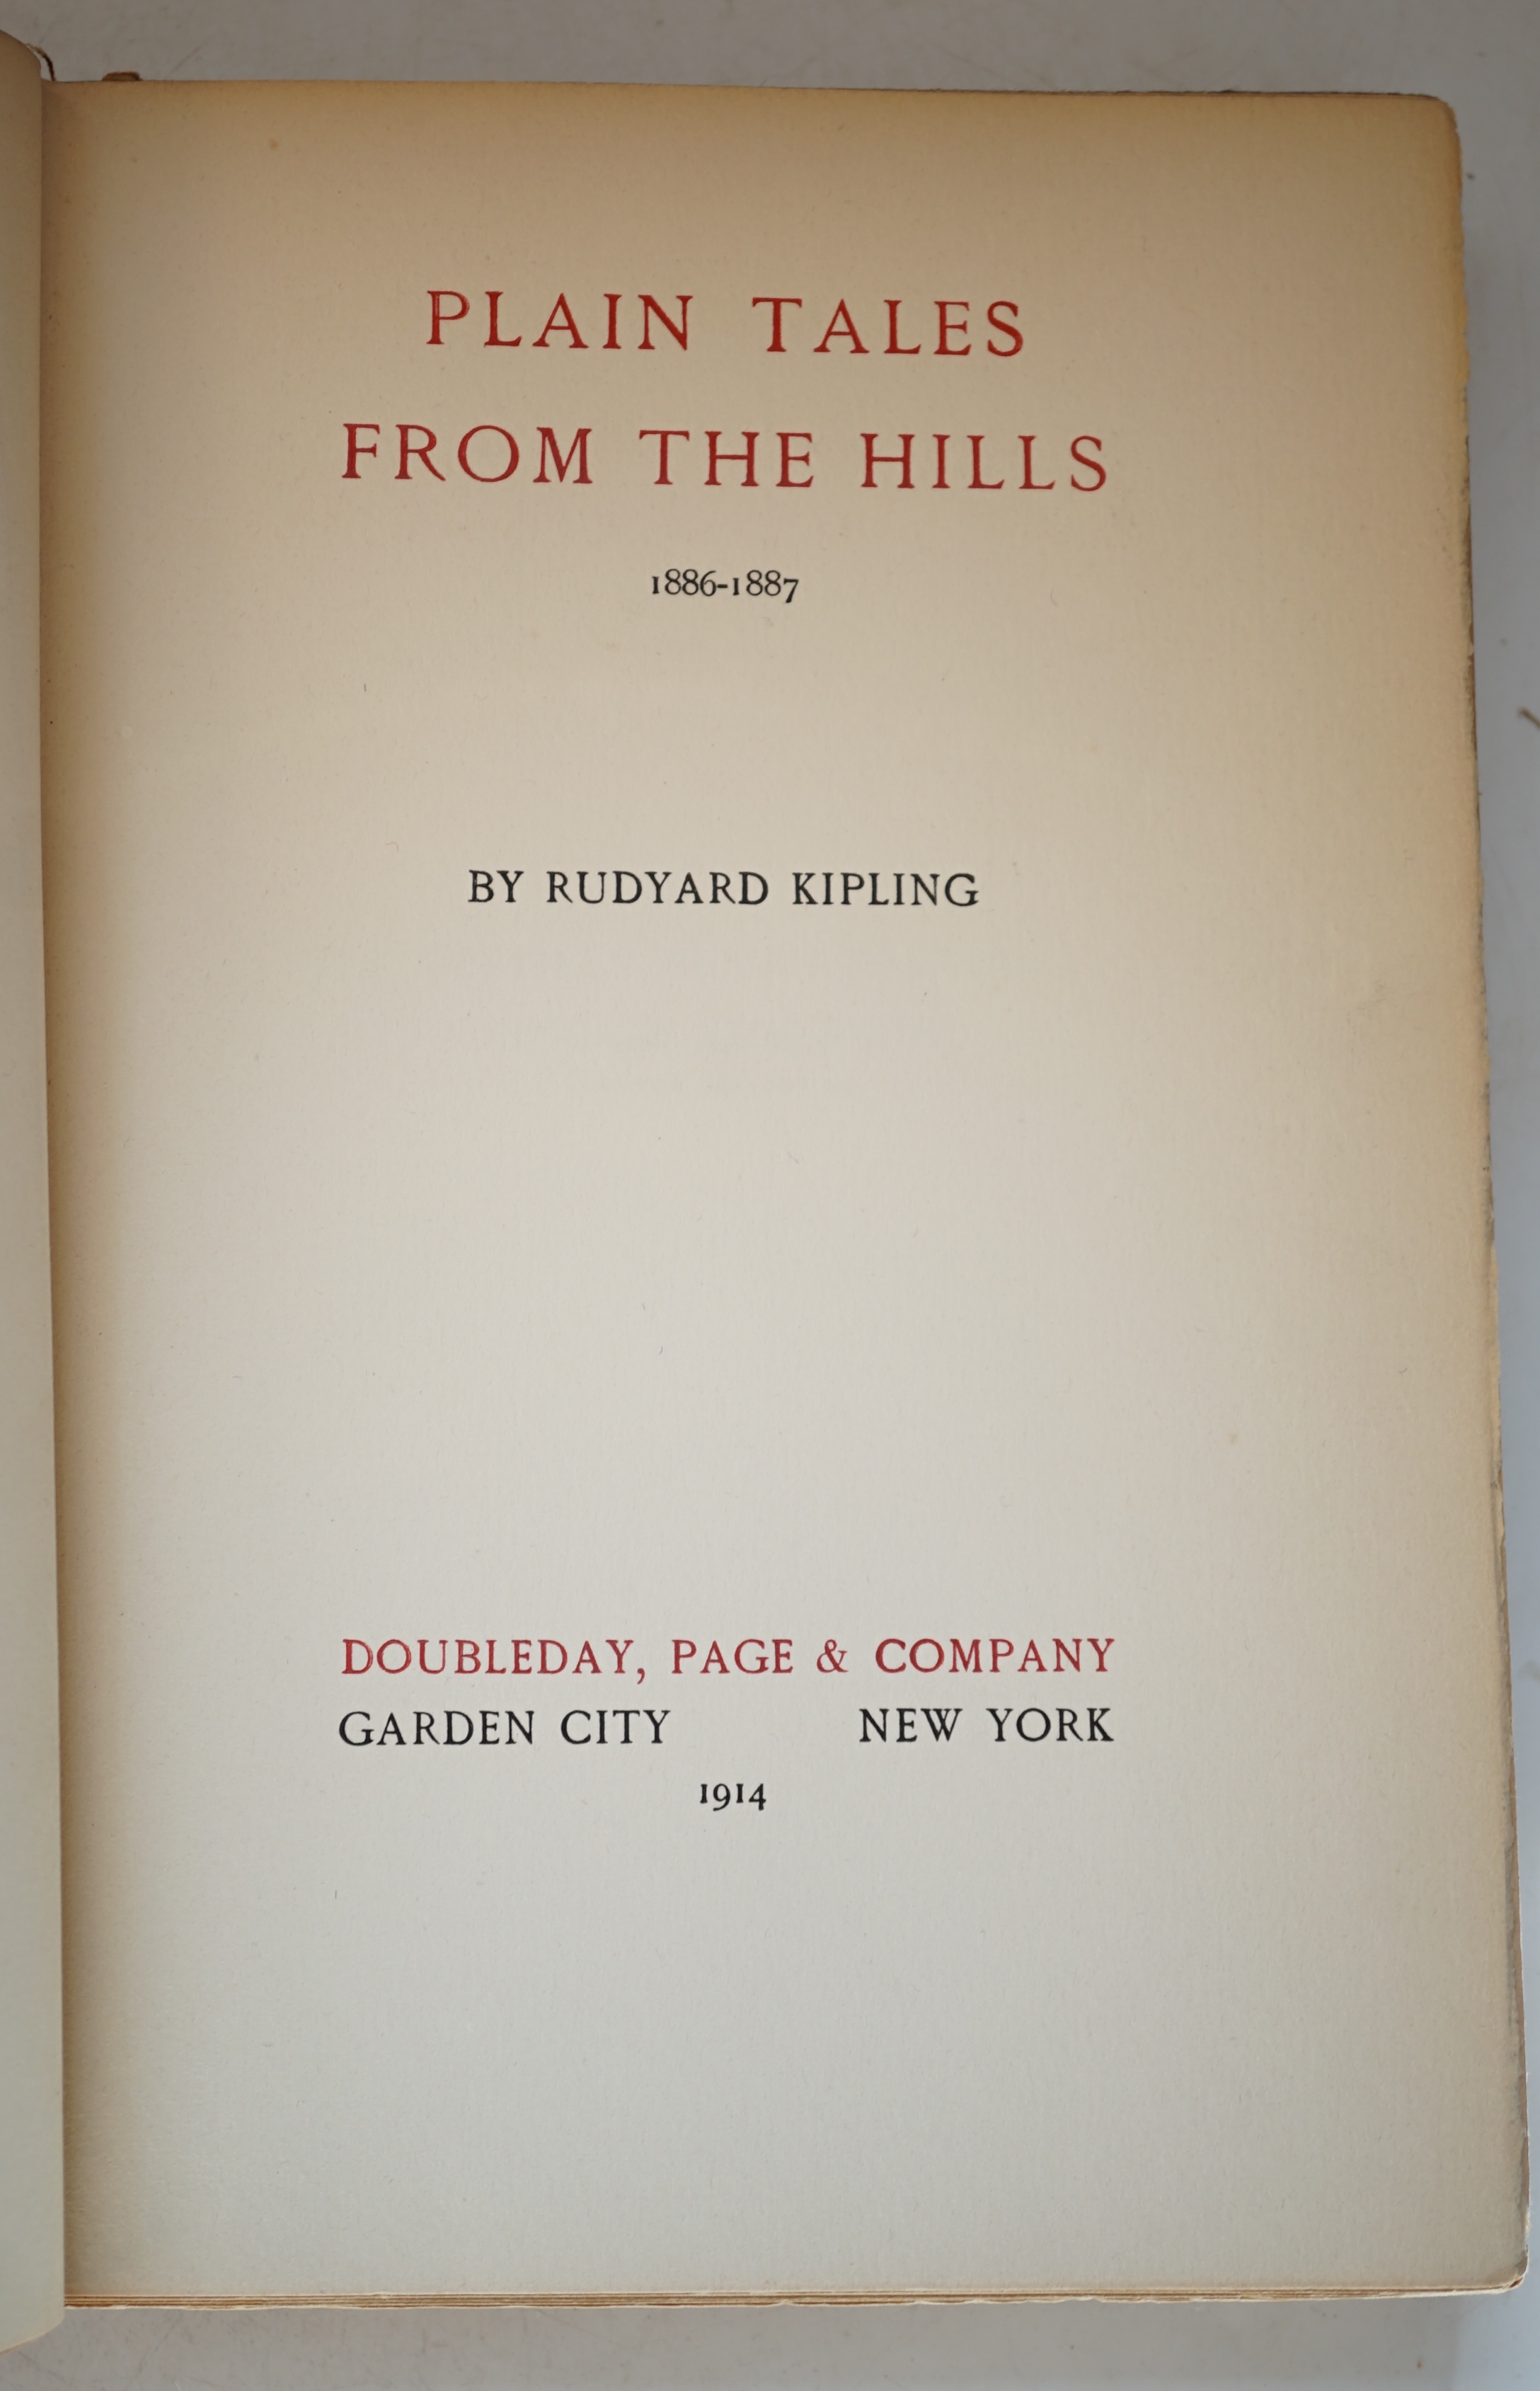 Kipling, Rudyard - Plain Tales from the Hills 1886-1887, vol 1. of ‘’The Seven Seas Edition of the Works of Rudyard Kipling’’, half title signed by the author, one of 1050, bookplate of Dr. Lester Hollander, 8vo, quarter